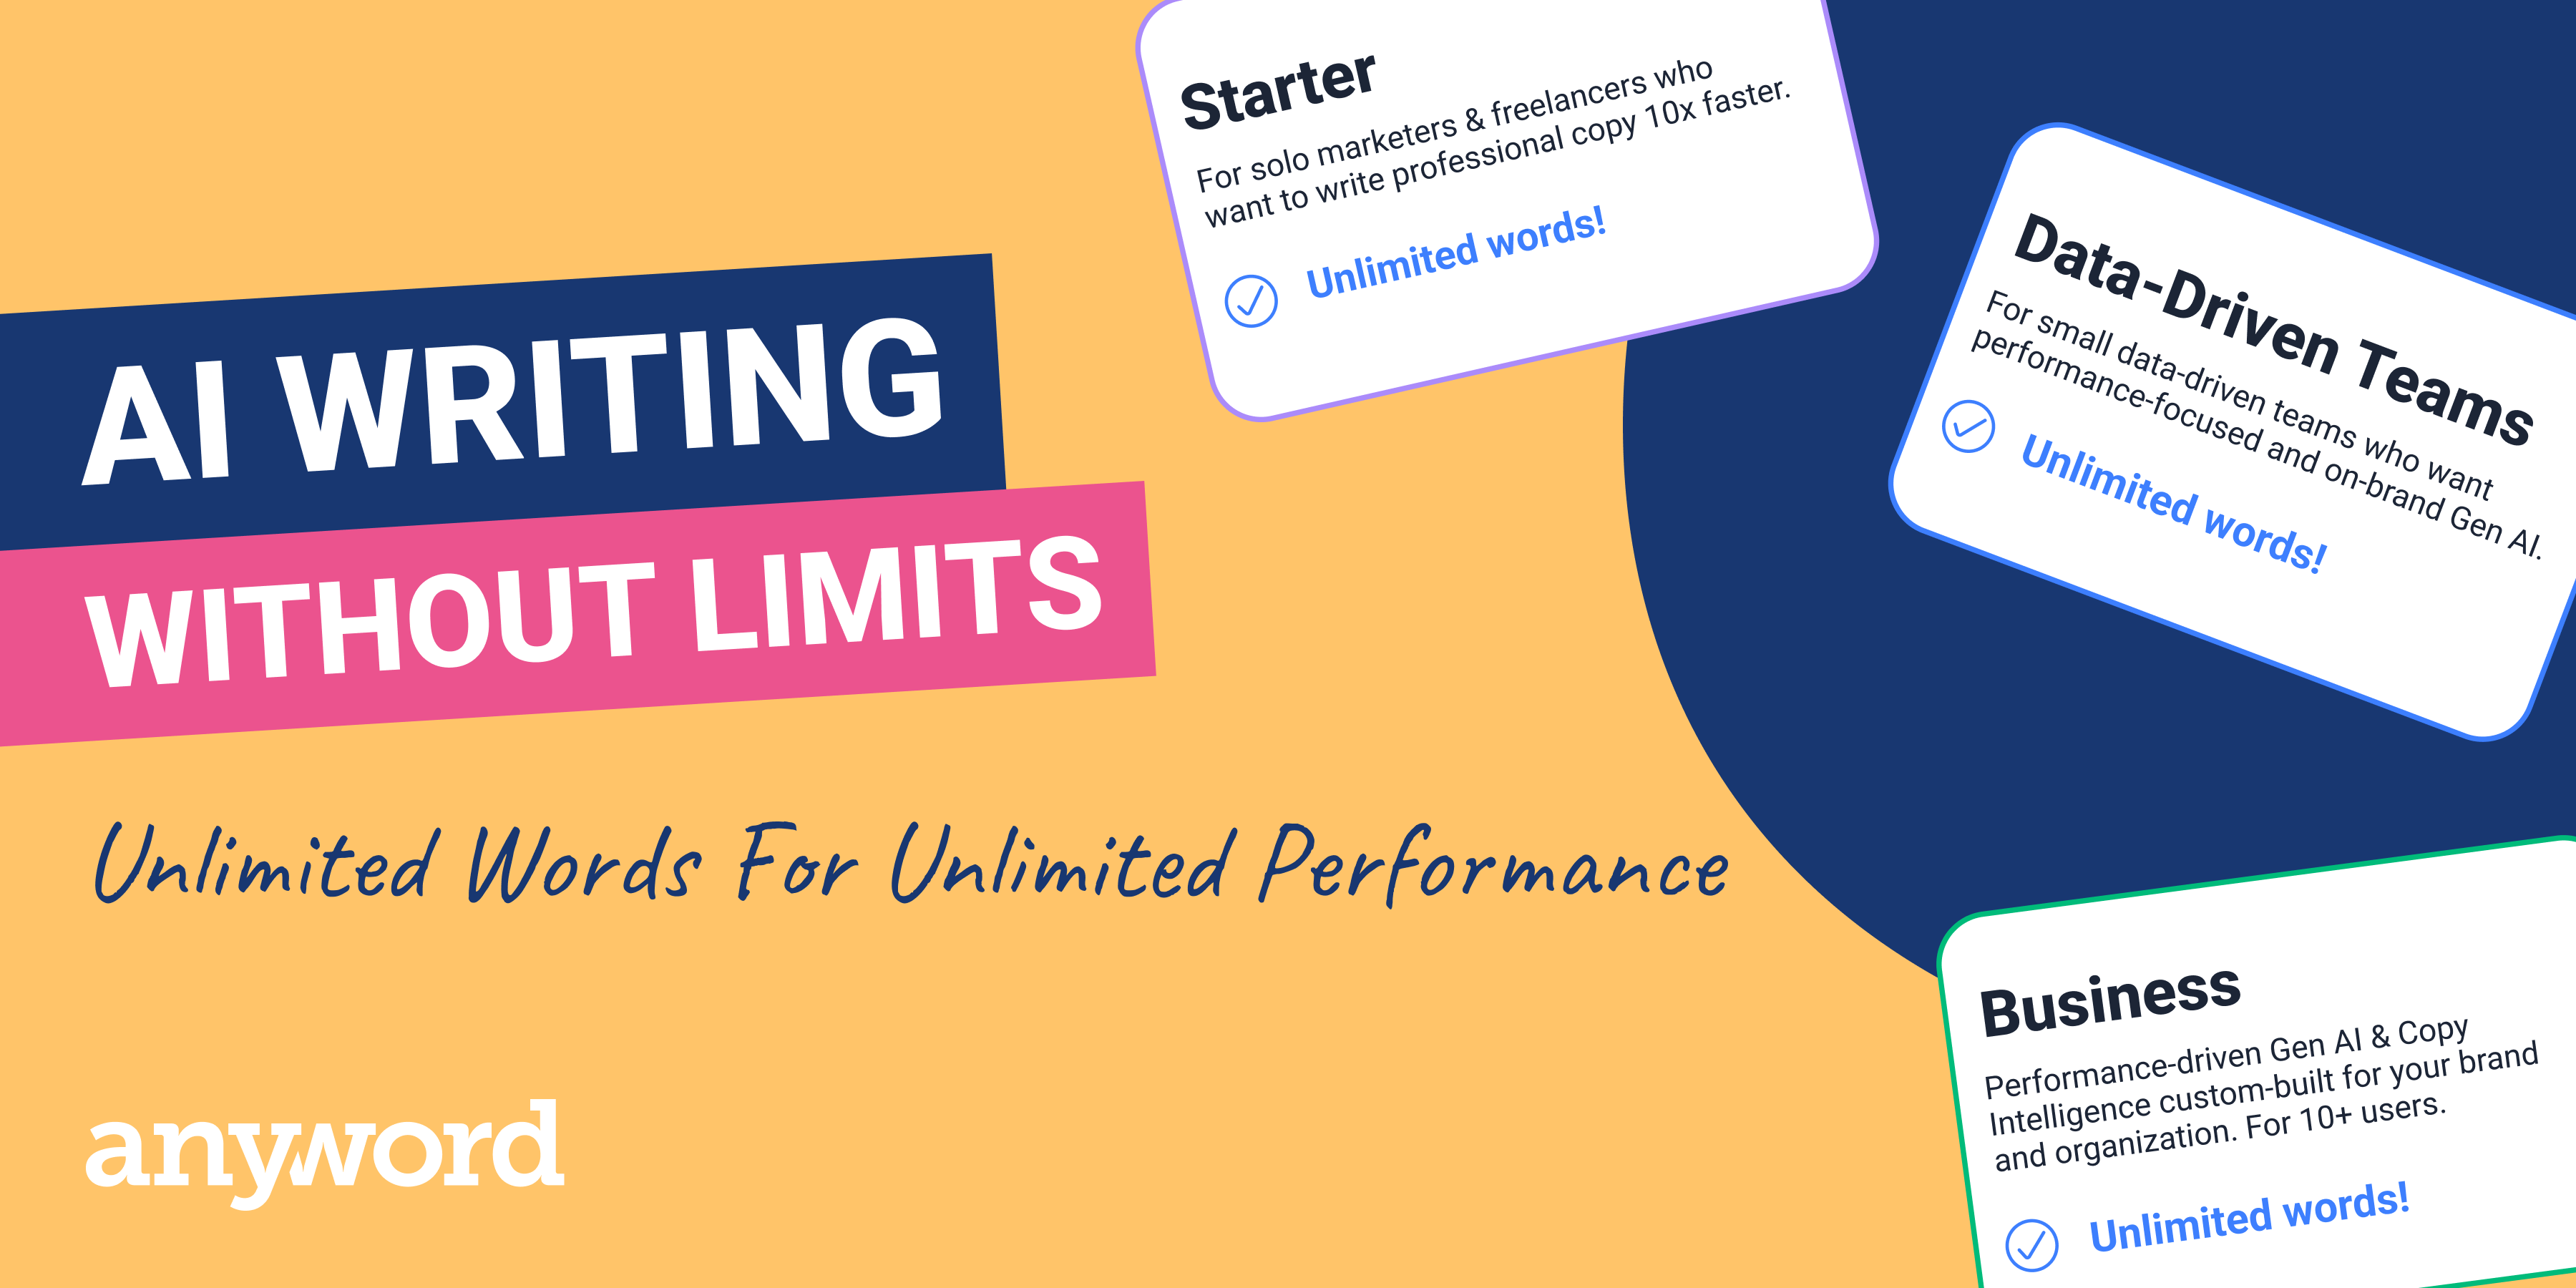 anywords new pricing plans give unlimited words to every plan and more premium performance features for AI Performance Writing Without Limits